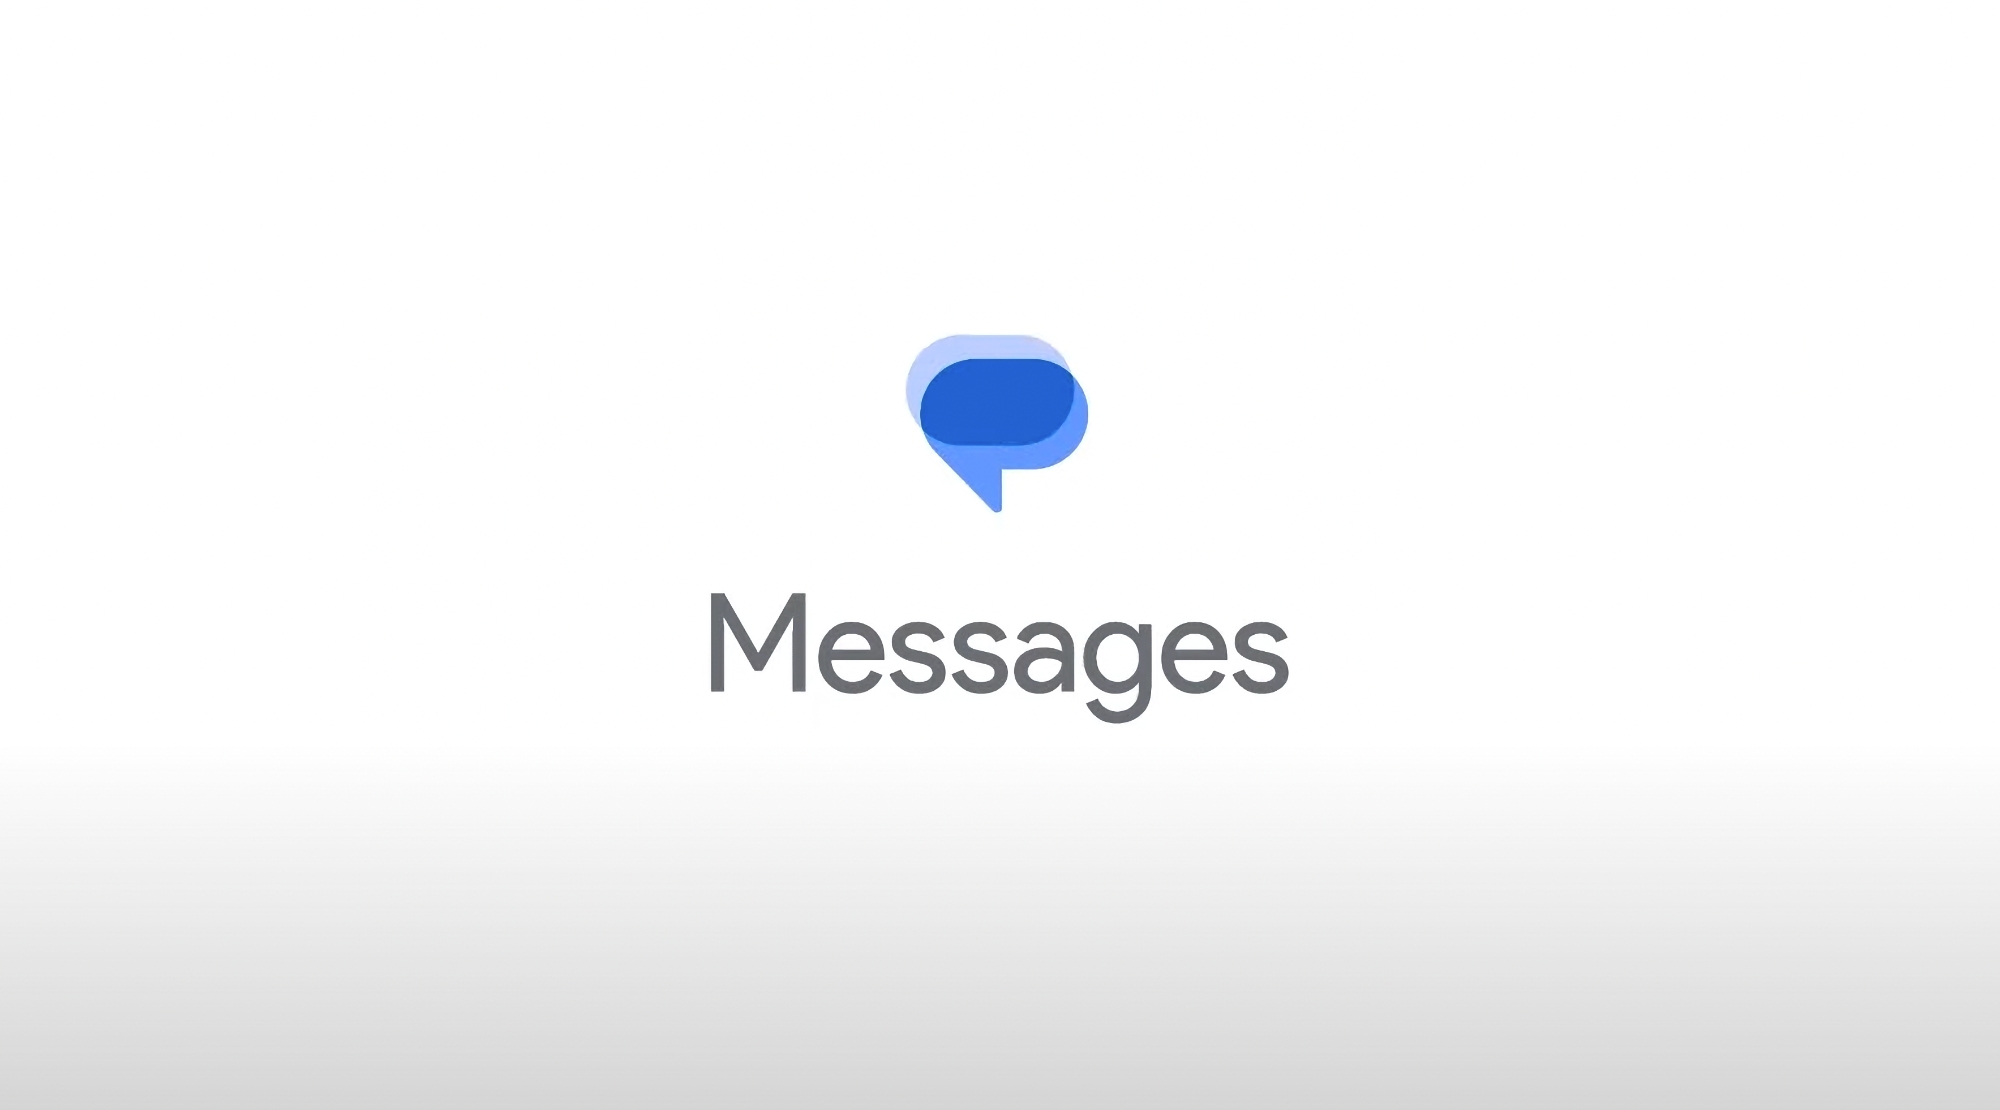 Google Messages got a major update: new app icon, PiP support for YouTube, and reactions to messages